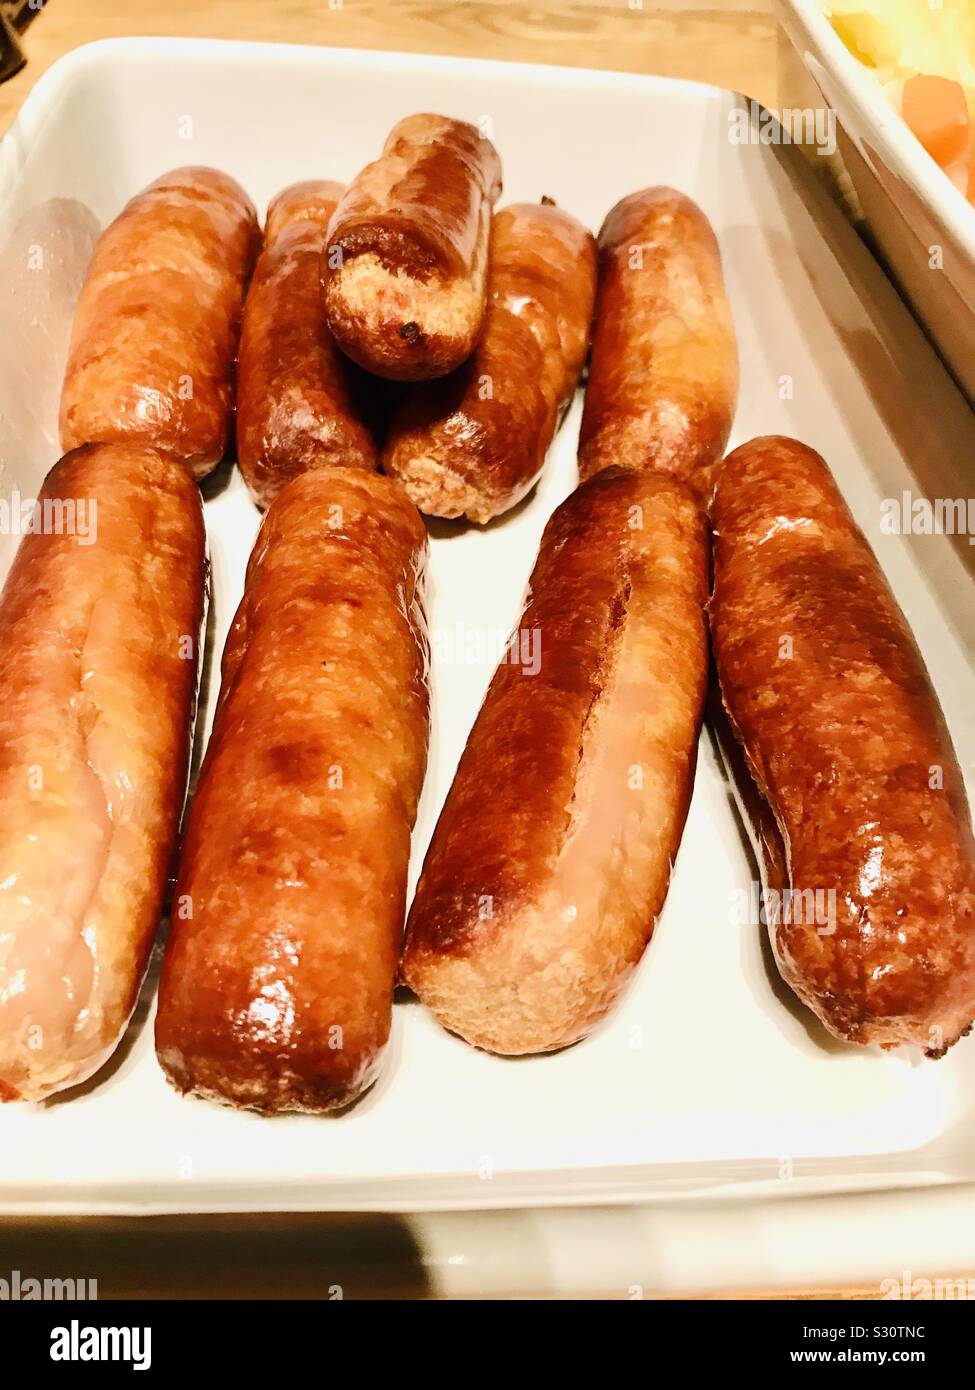 Cooked pork sausages Stock Photo